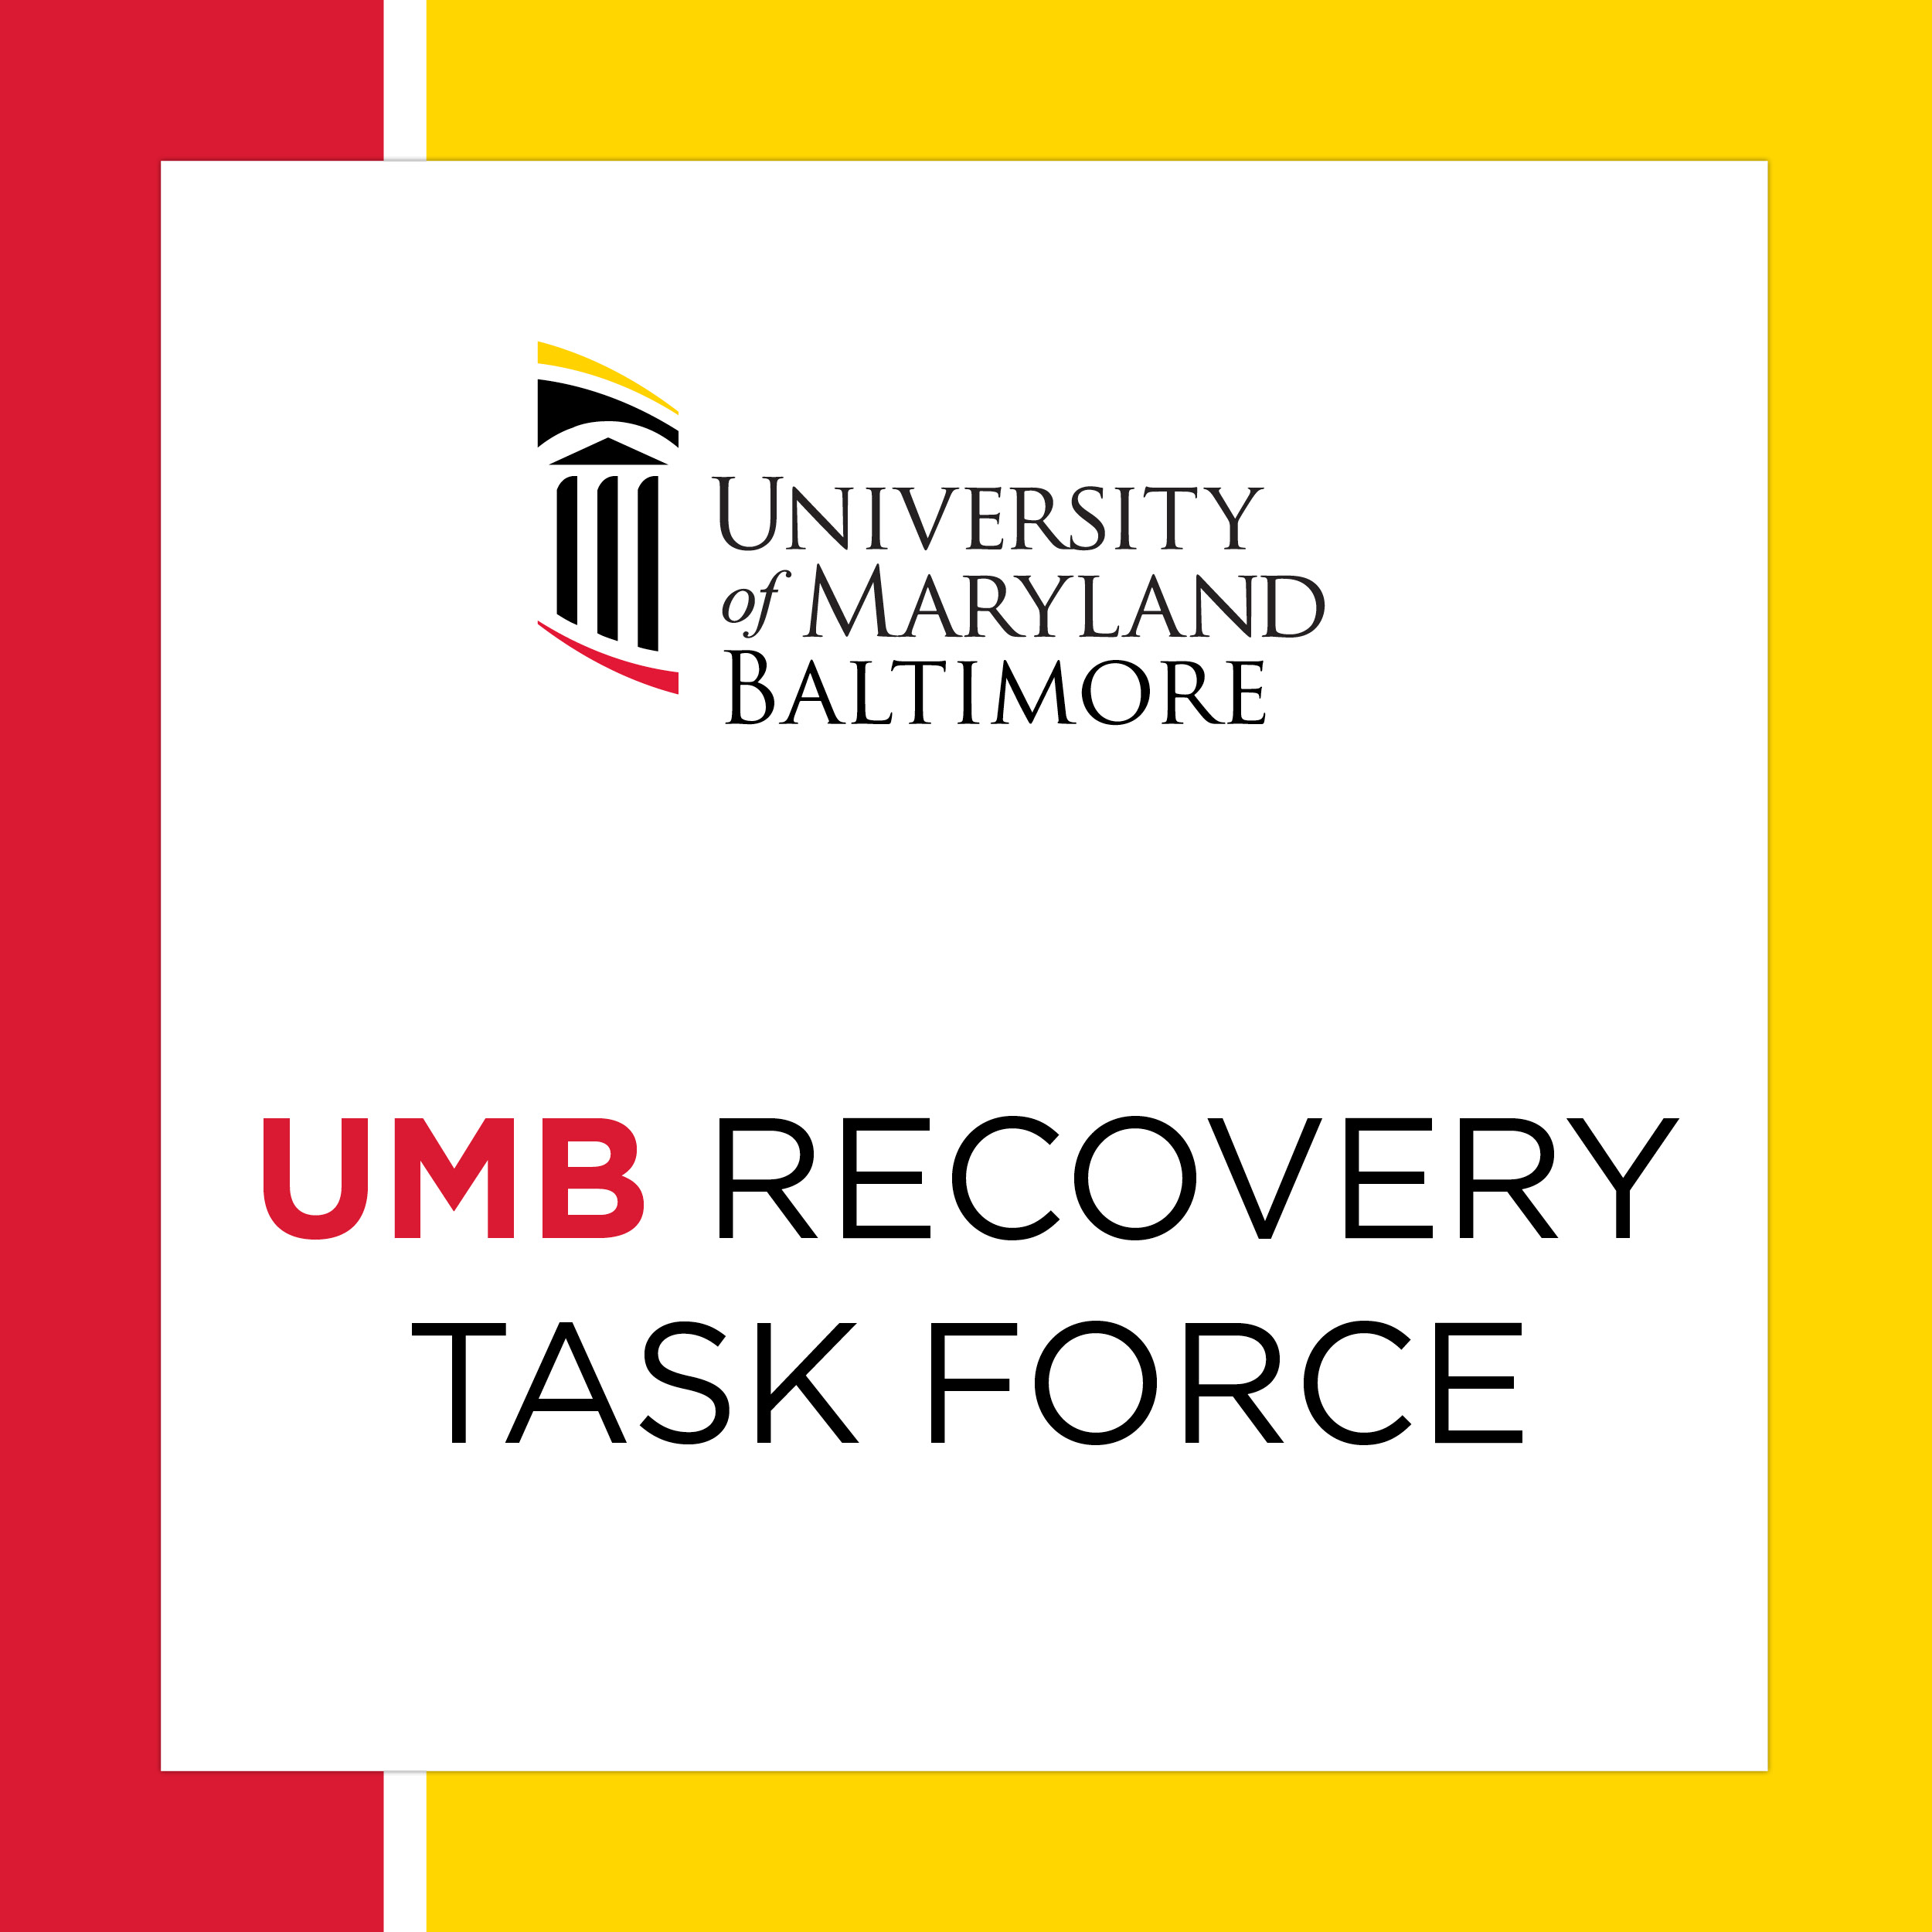 UMB Recovery task force logo